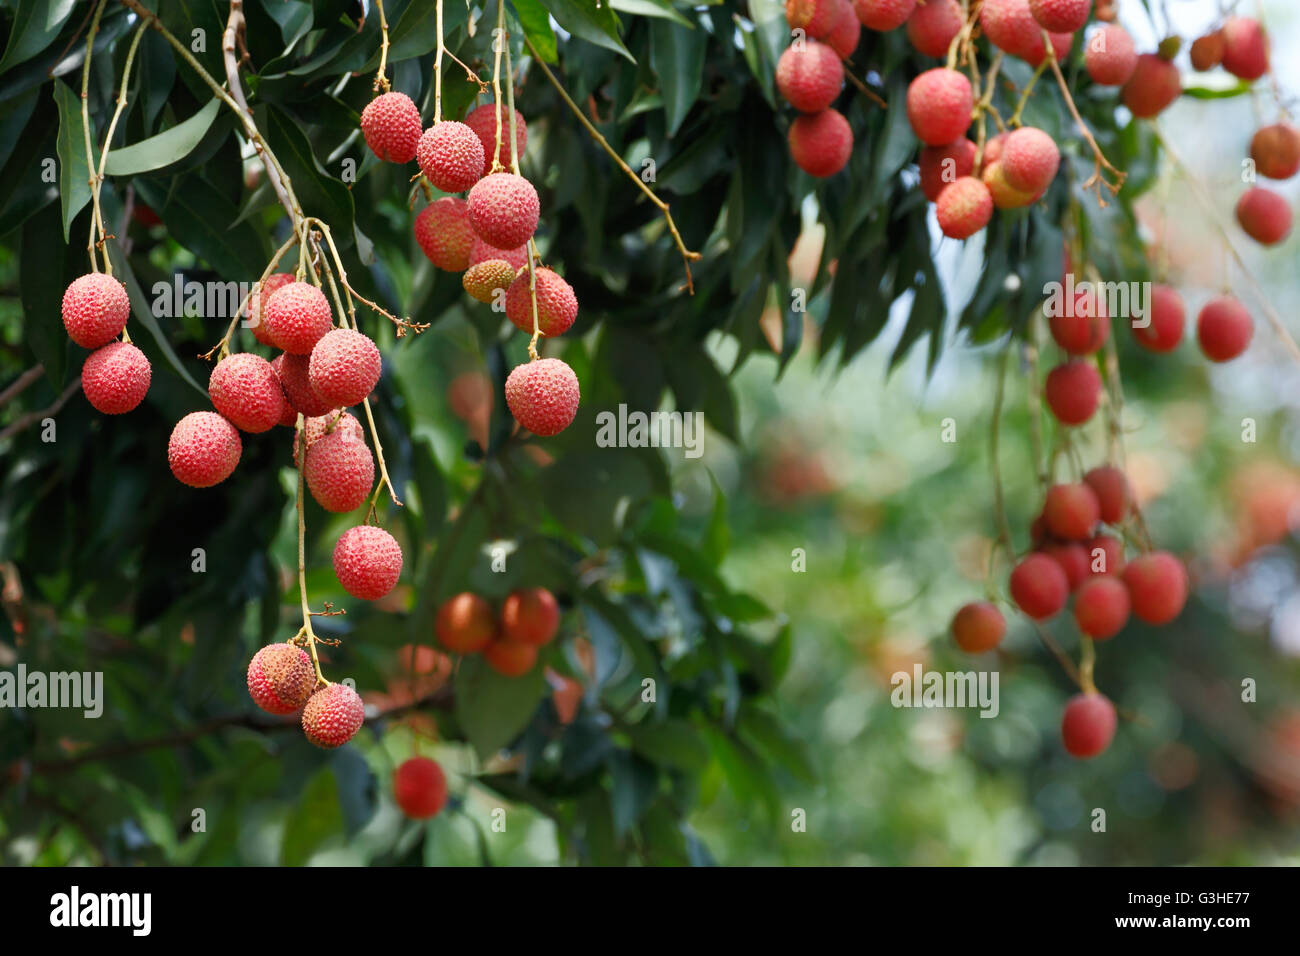 Lychee (Litchi chinensis) the tropical and subtropical fruits native to China Stock Photo